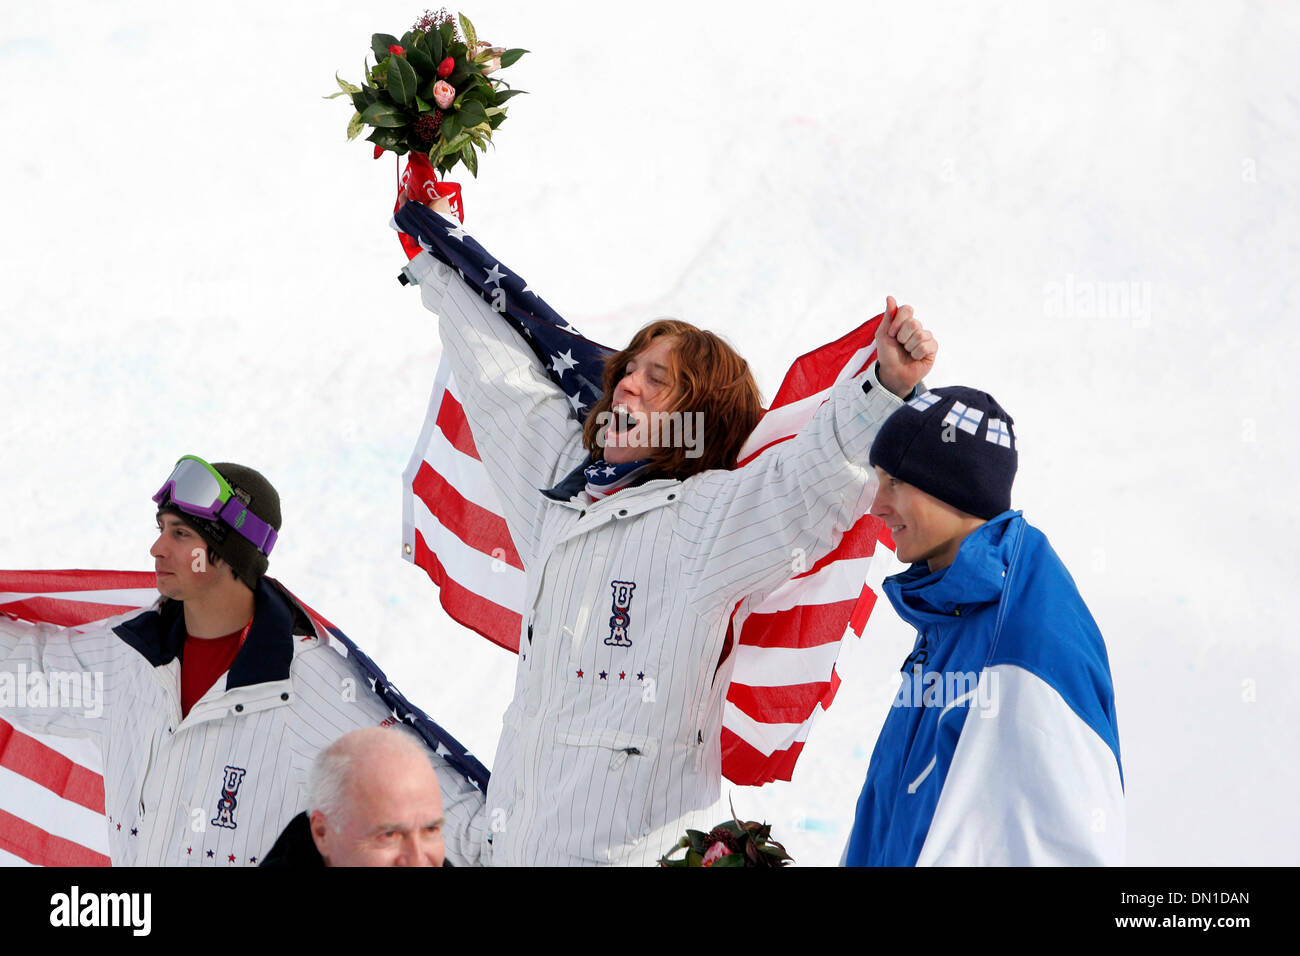 Feb 12, 2006; Bardonecchia, ITALY; XX Winter Olympics: SHAUN WHITE of the  US celebrates after winning a gold medal in the men's half pipe  snowboarding competition at the Torino 2006 Winter Olympic